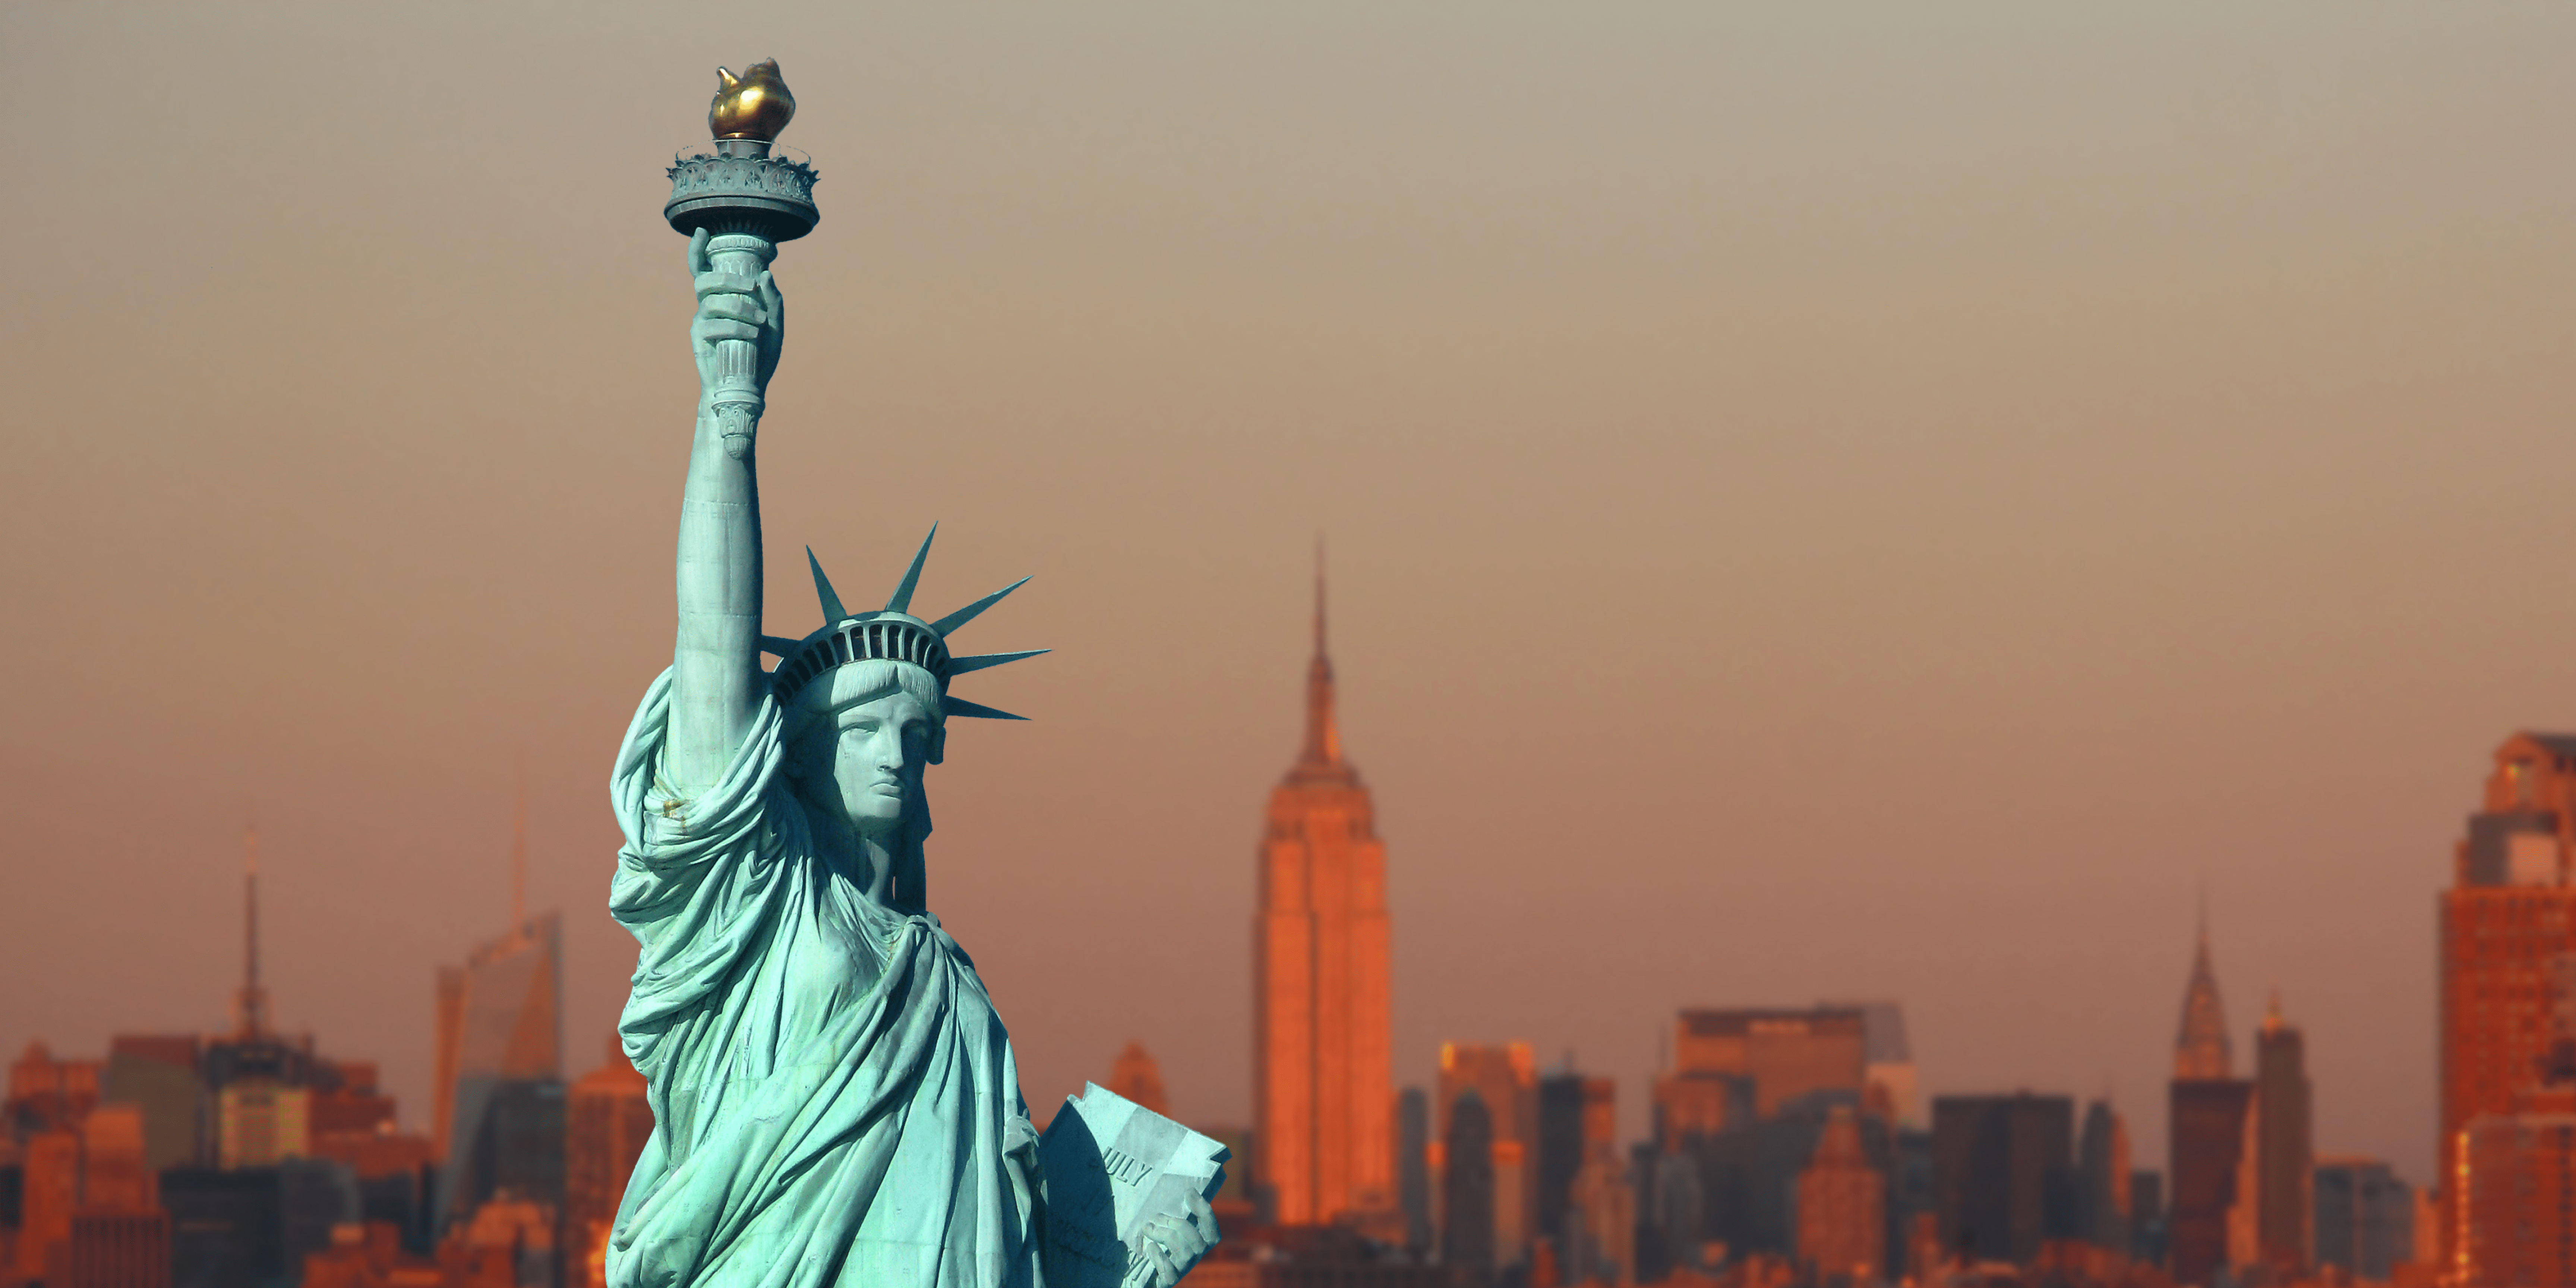 The Statue of Liberty: Symbol of Freedom and Unity